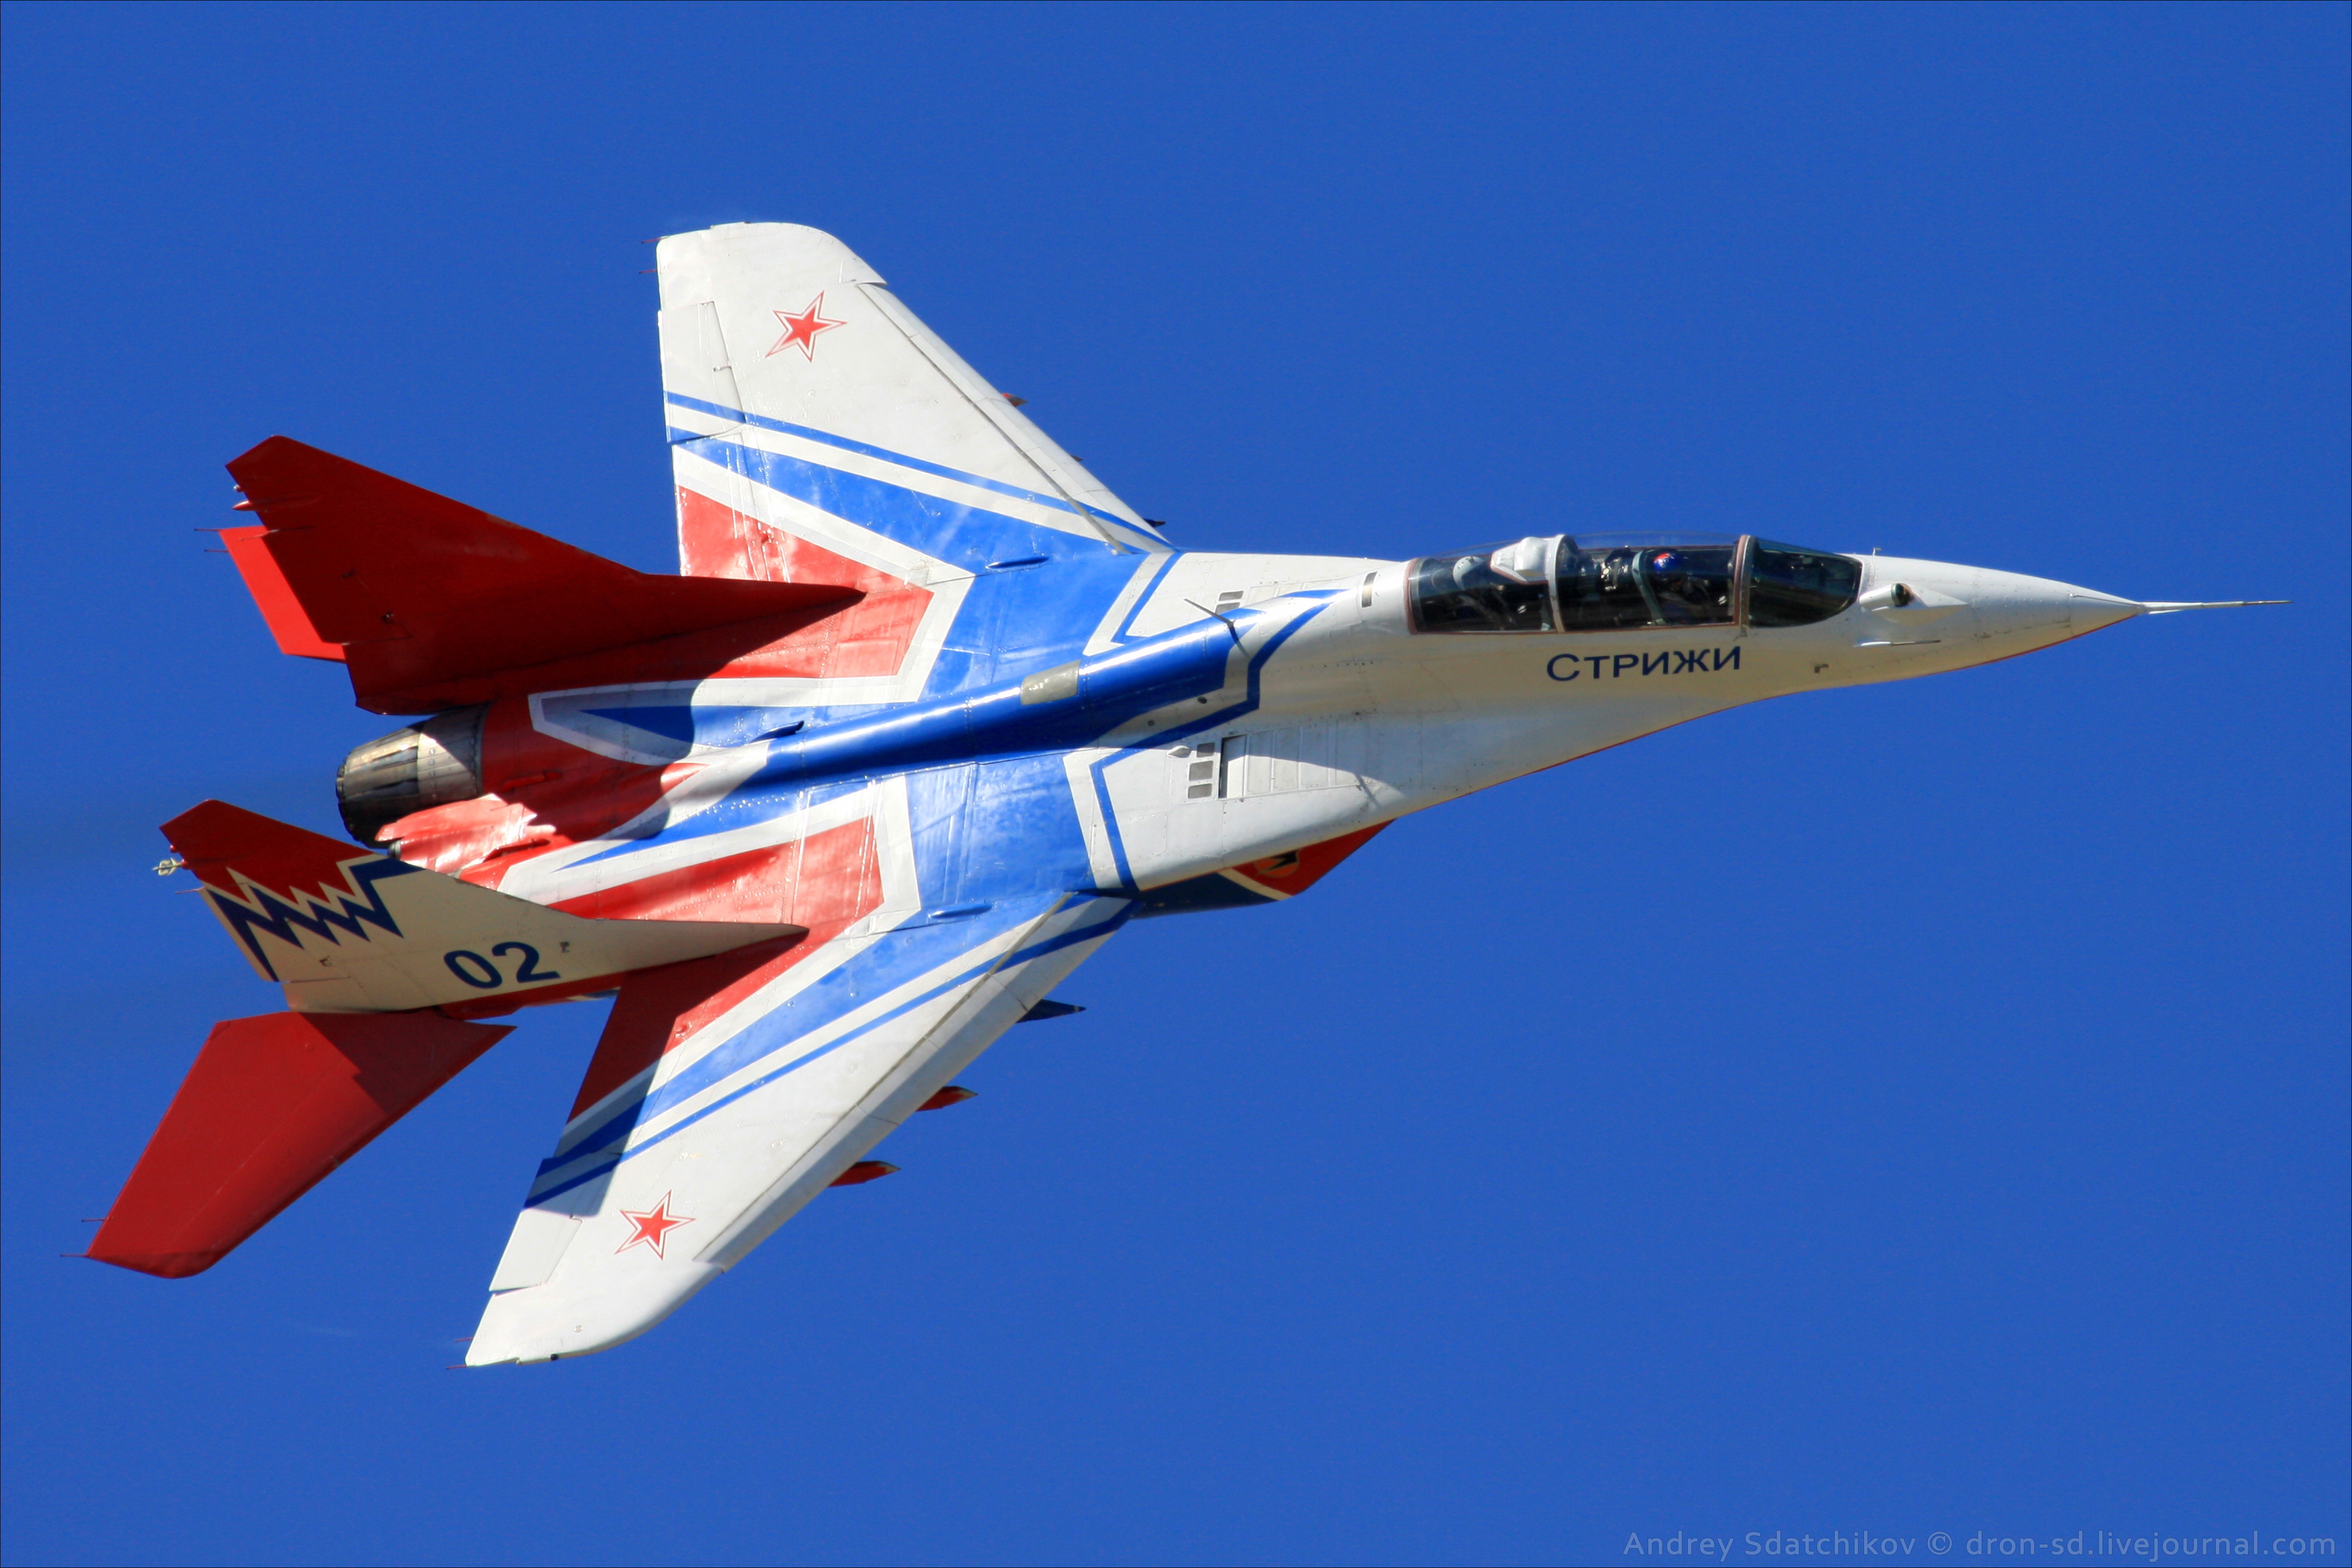 MAKS-2015 Air Show: Photos and Discussion - Page 3 0_1226a8_eae0cc33_orig